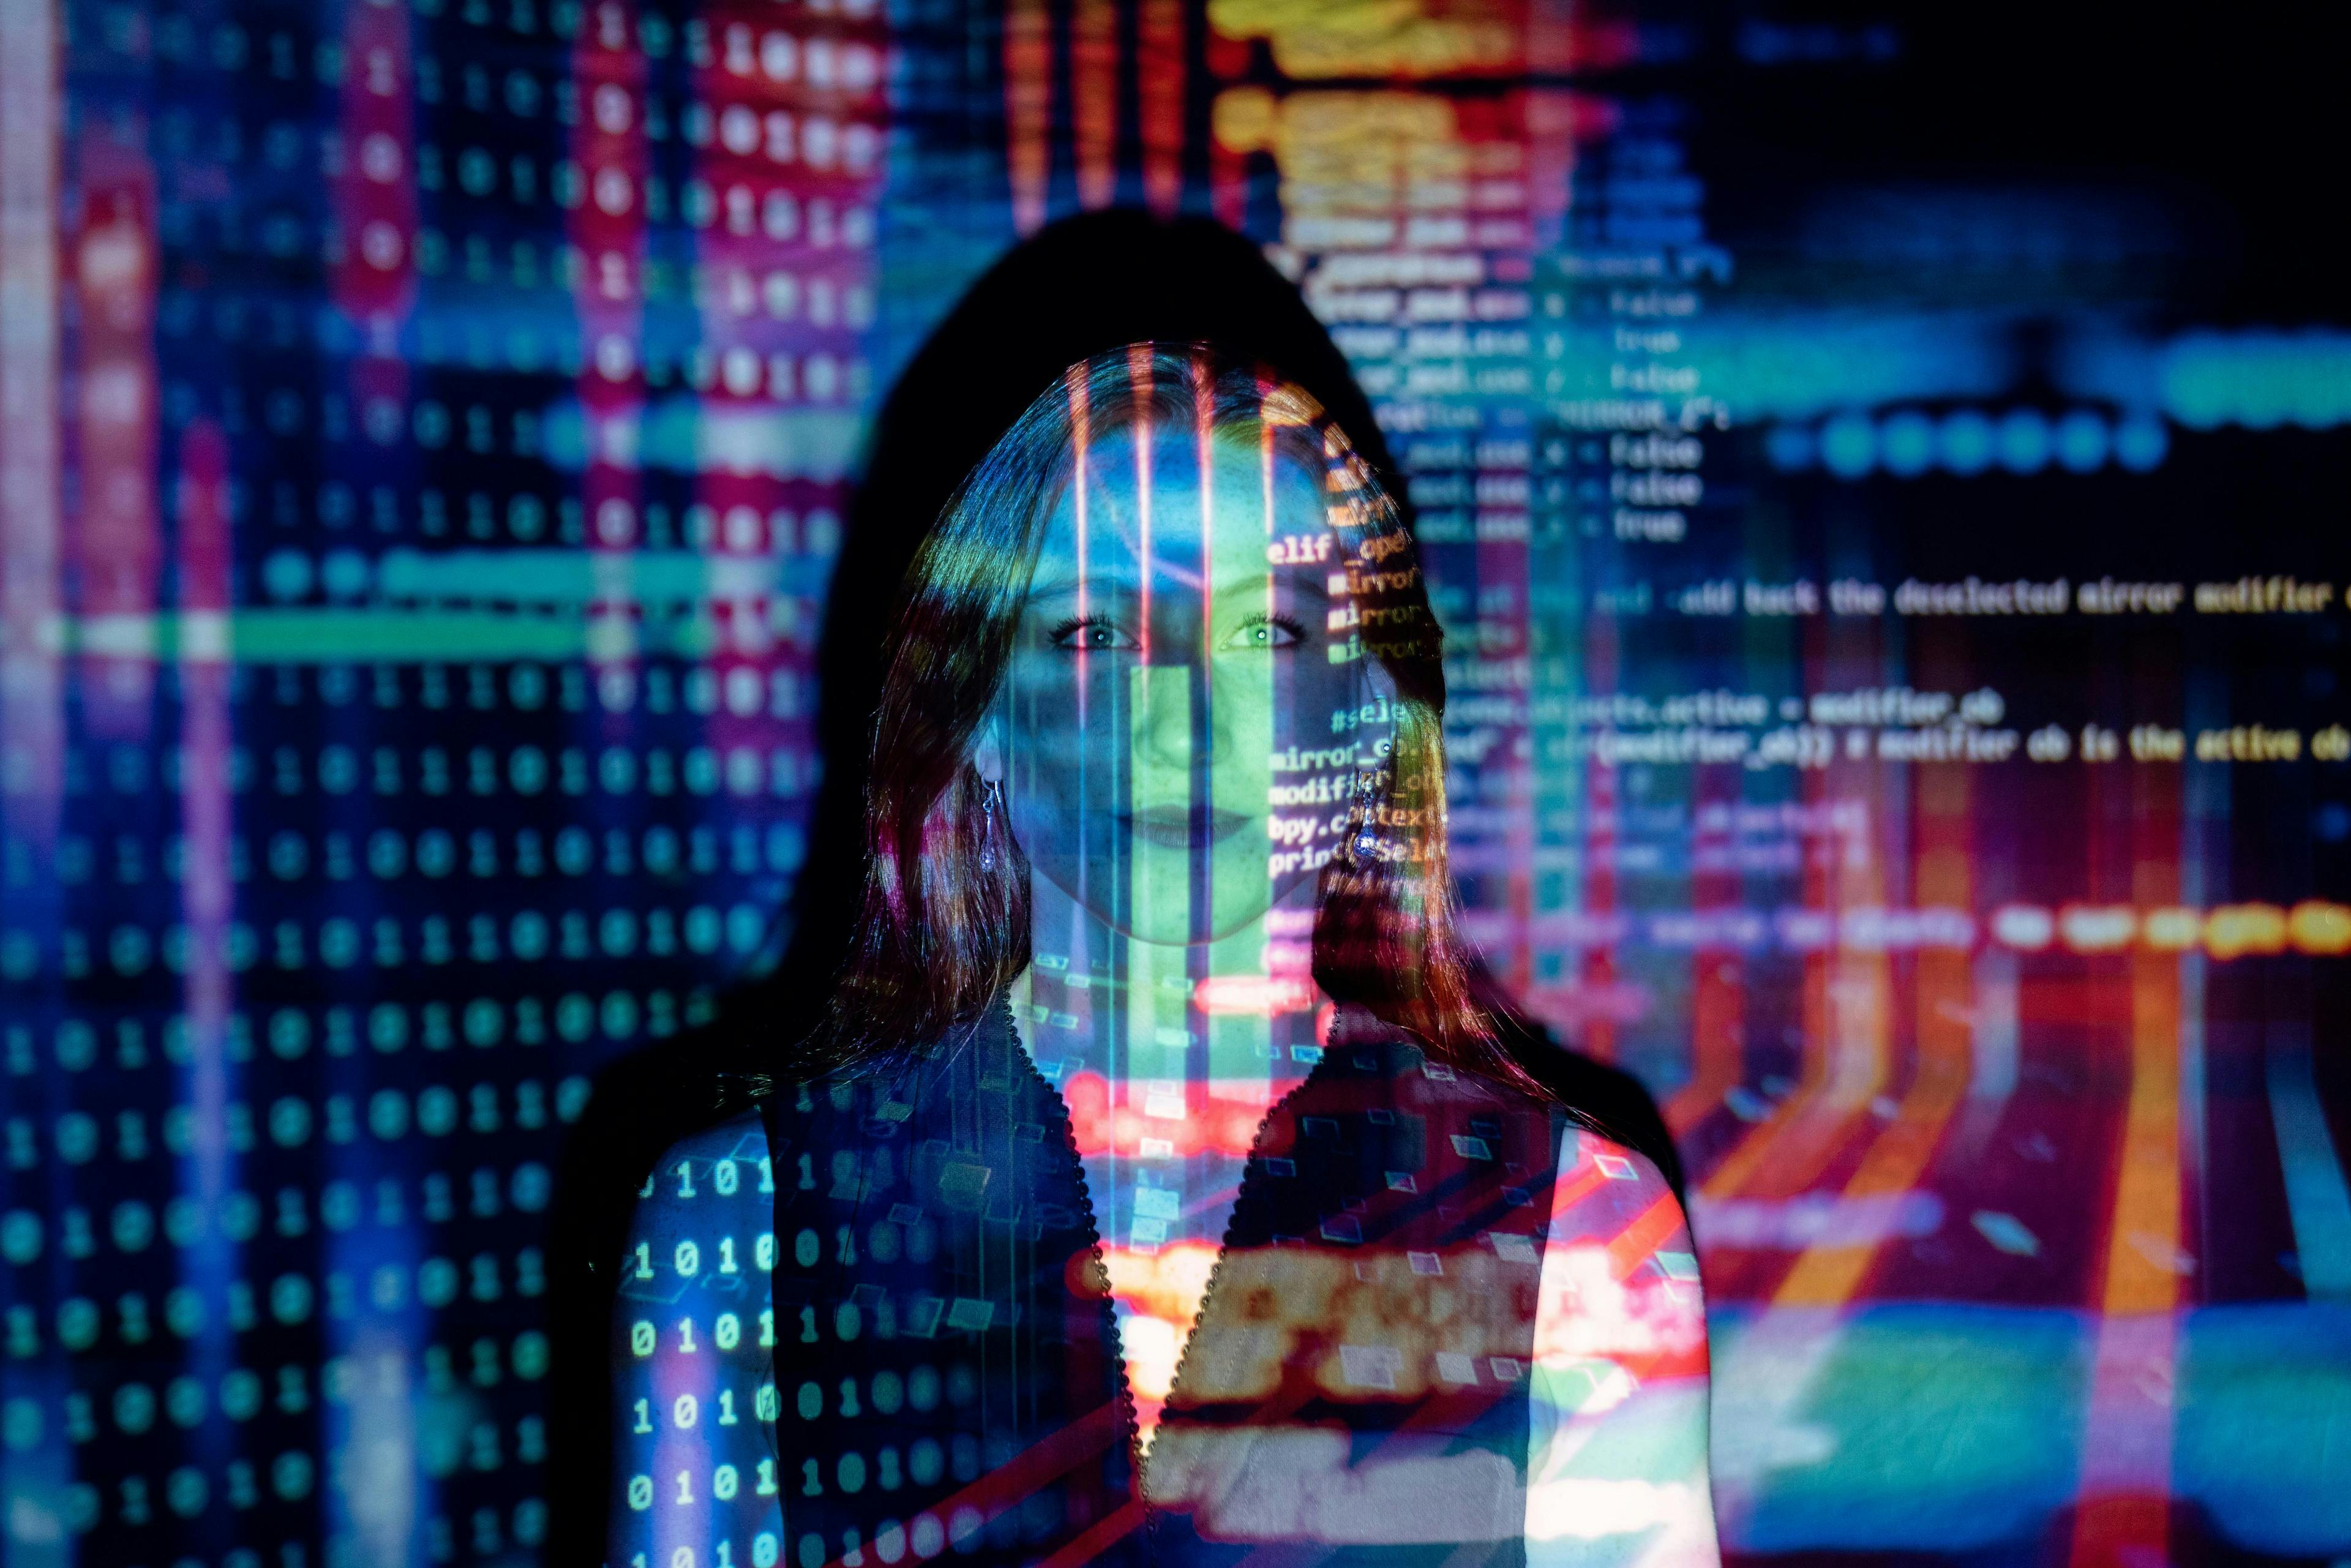 Woman standing with colorful lines of code and binary digits projected on her and the background, creating an overlay of digital imagery.